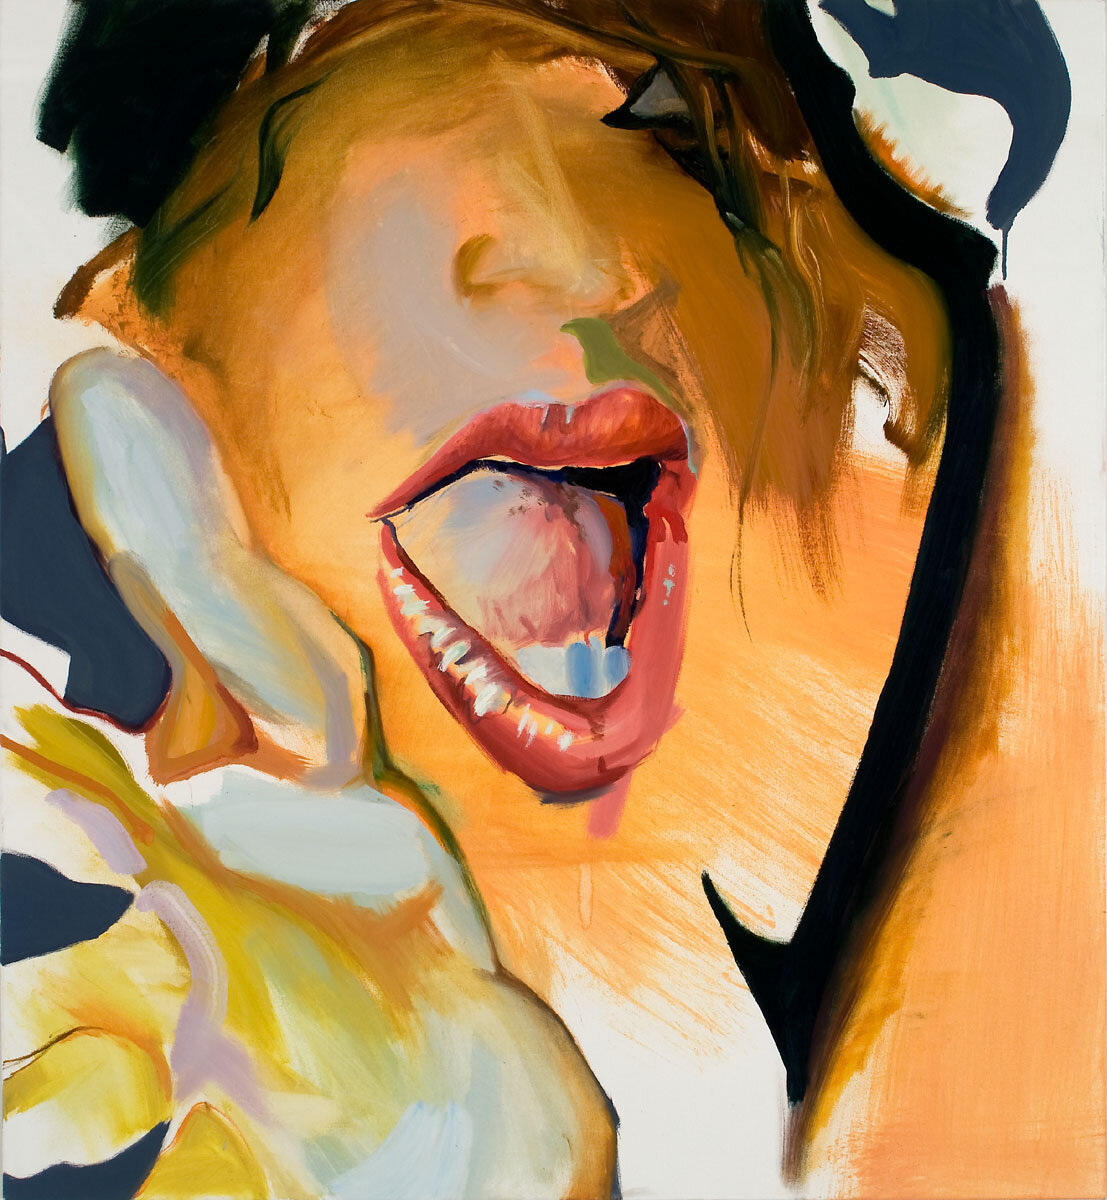 Frenching, 32"x40", oil on canvas, 2008